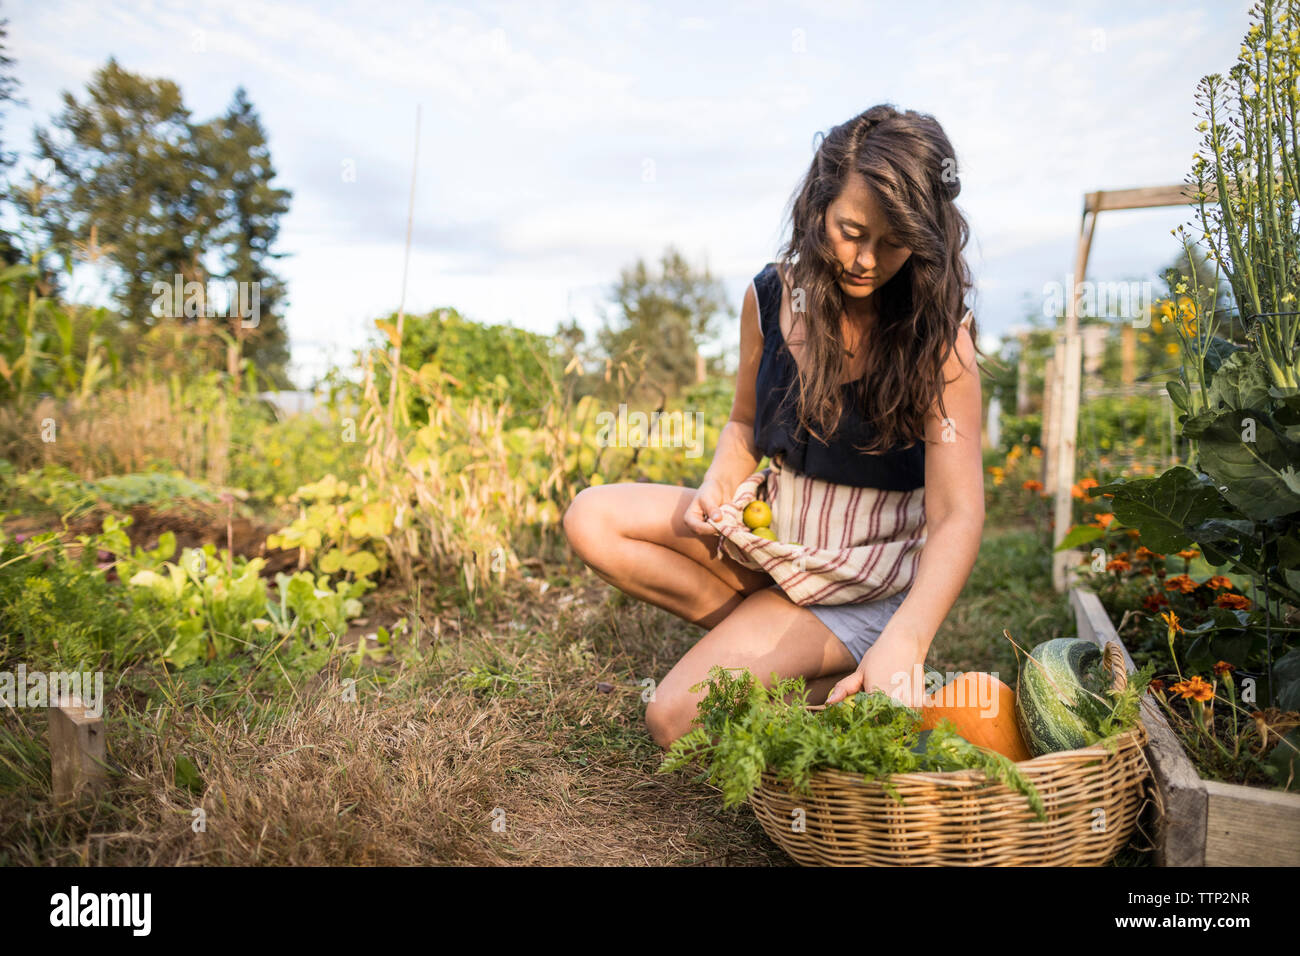 Woman carrying vegetables in textile while crouching at community garden Stock Photo